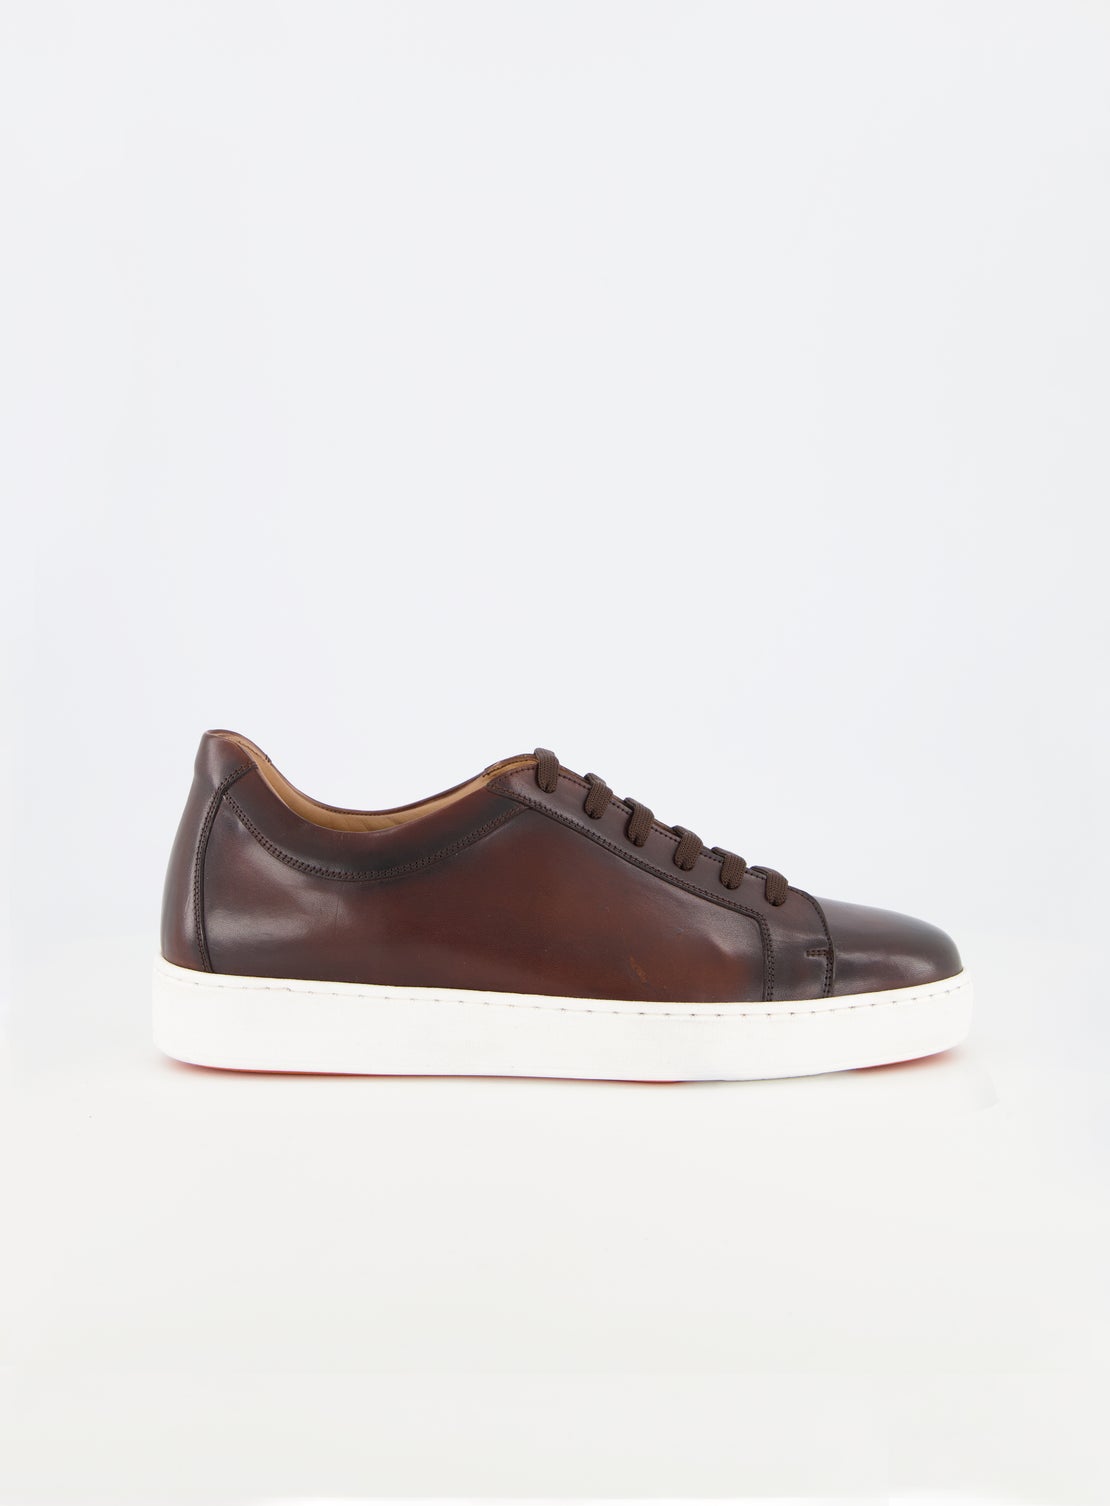 Rome Burnished Tan Sneaker With White Sole